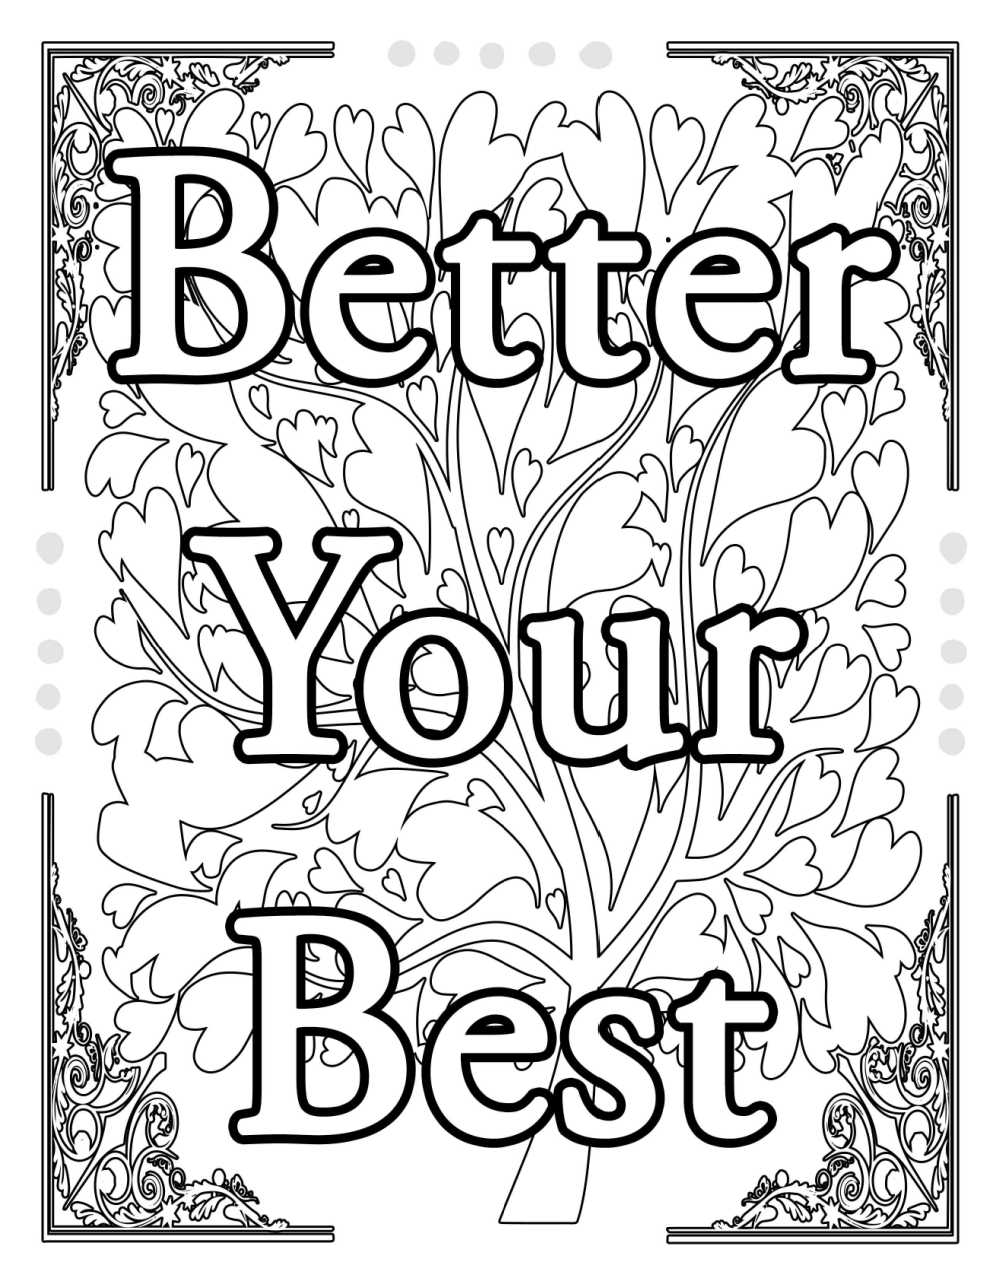 Better Your Best Motivational Coloring Page   Mama Likes This